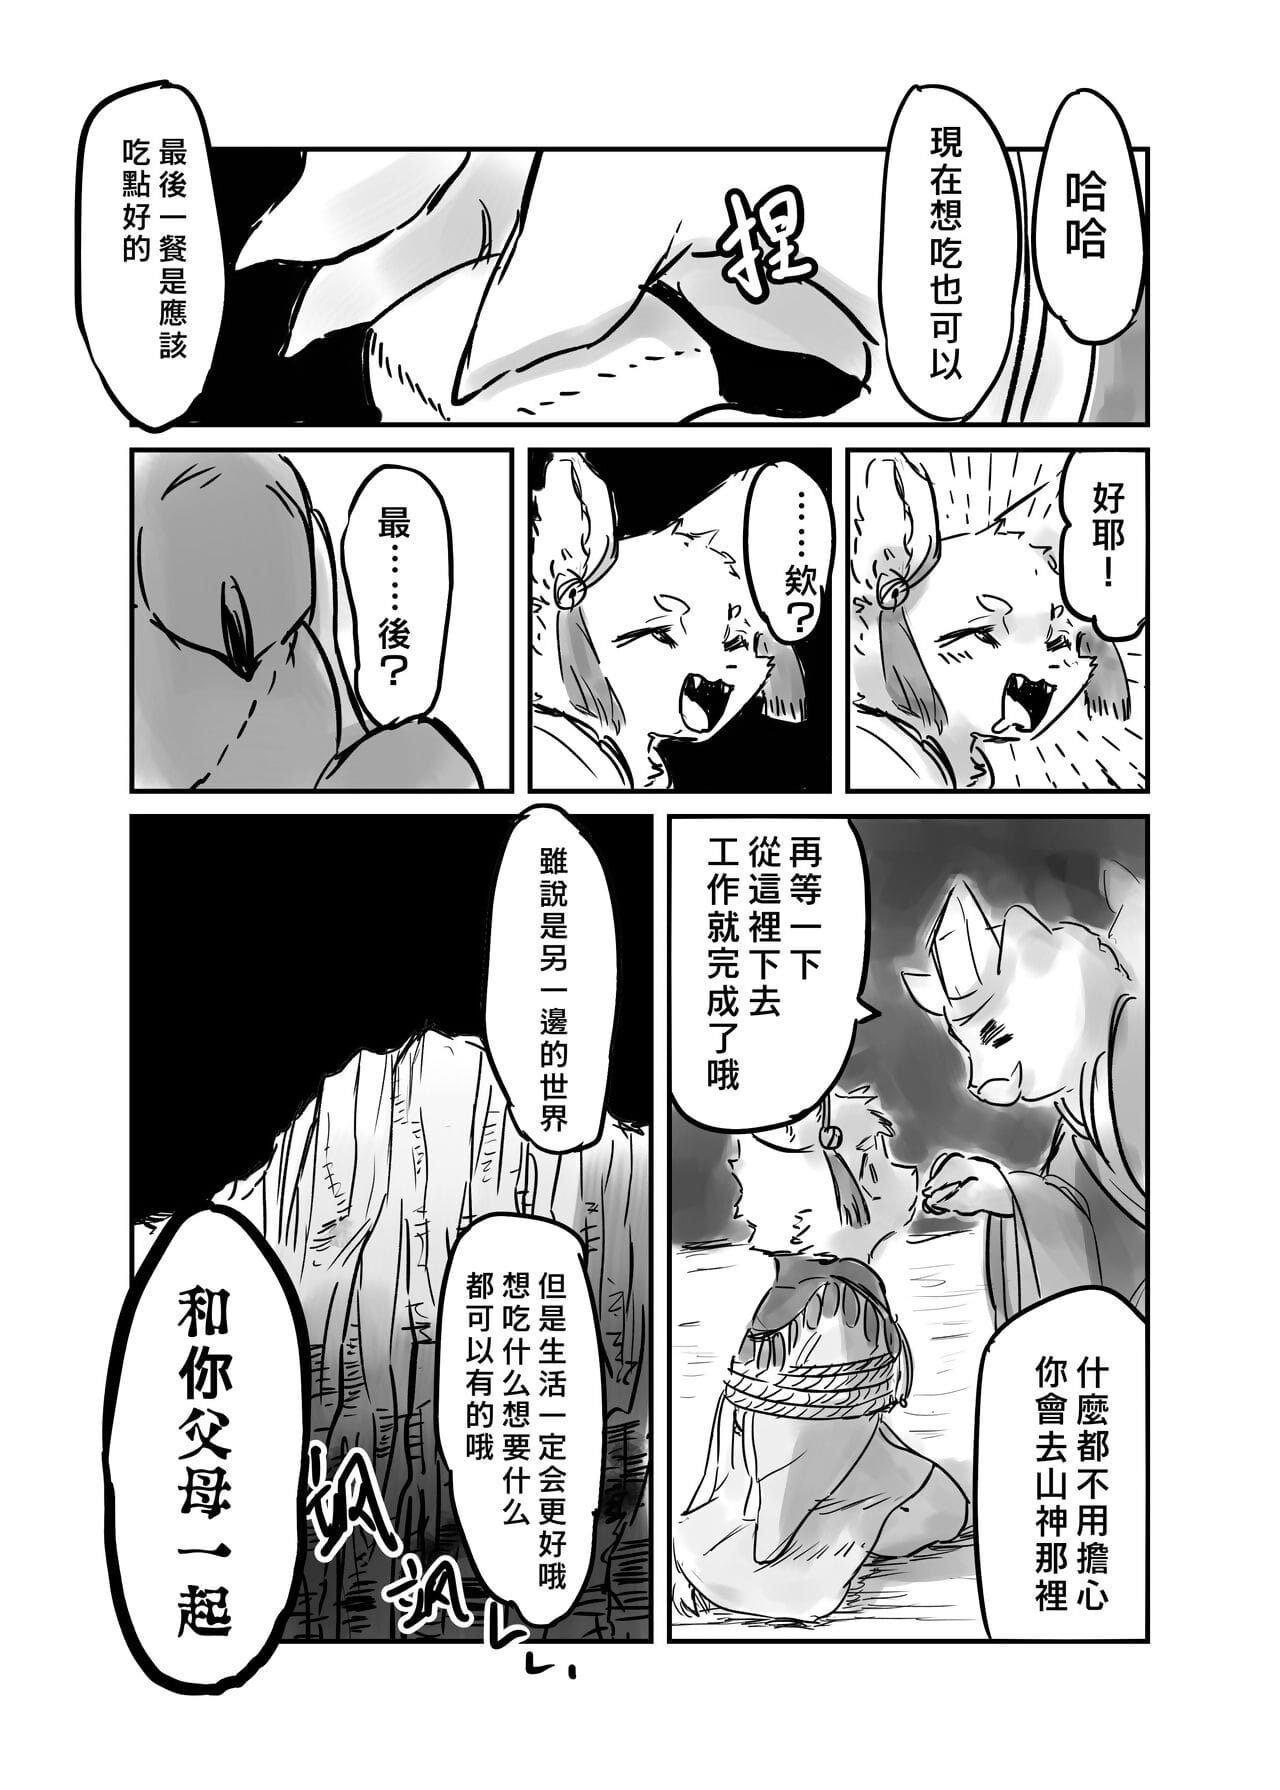 （the visiteur 他乡之人 by：鬼流 PARTIE 3 page 1